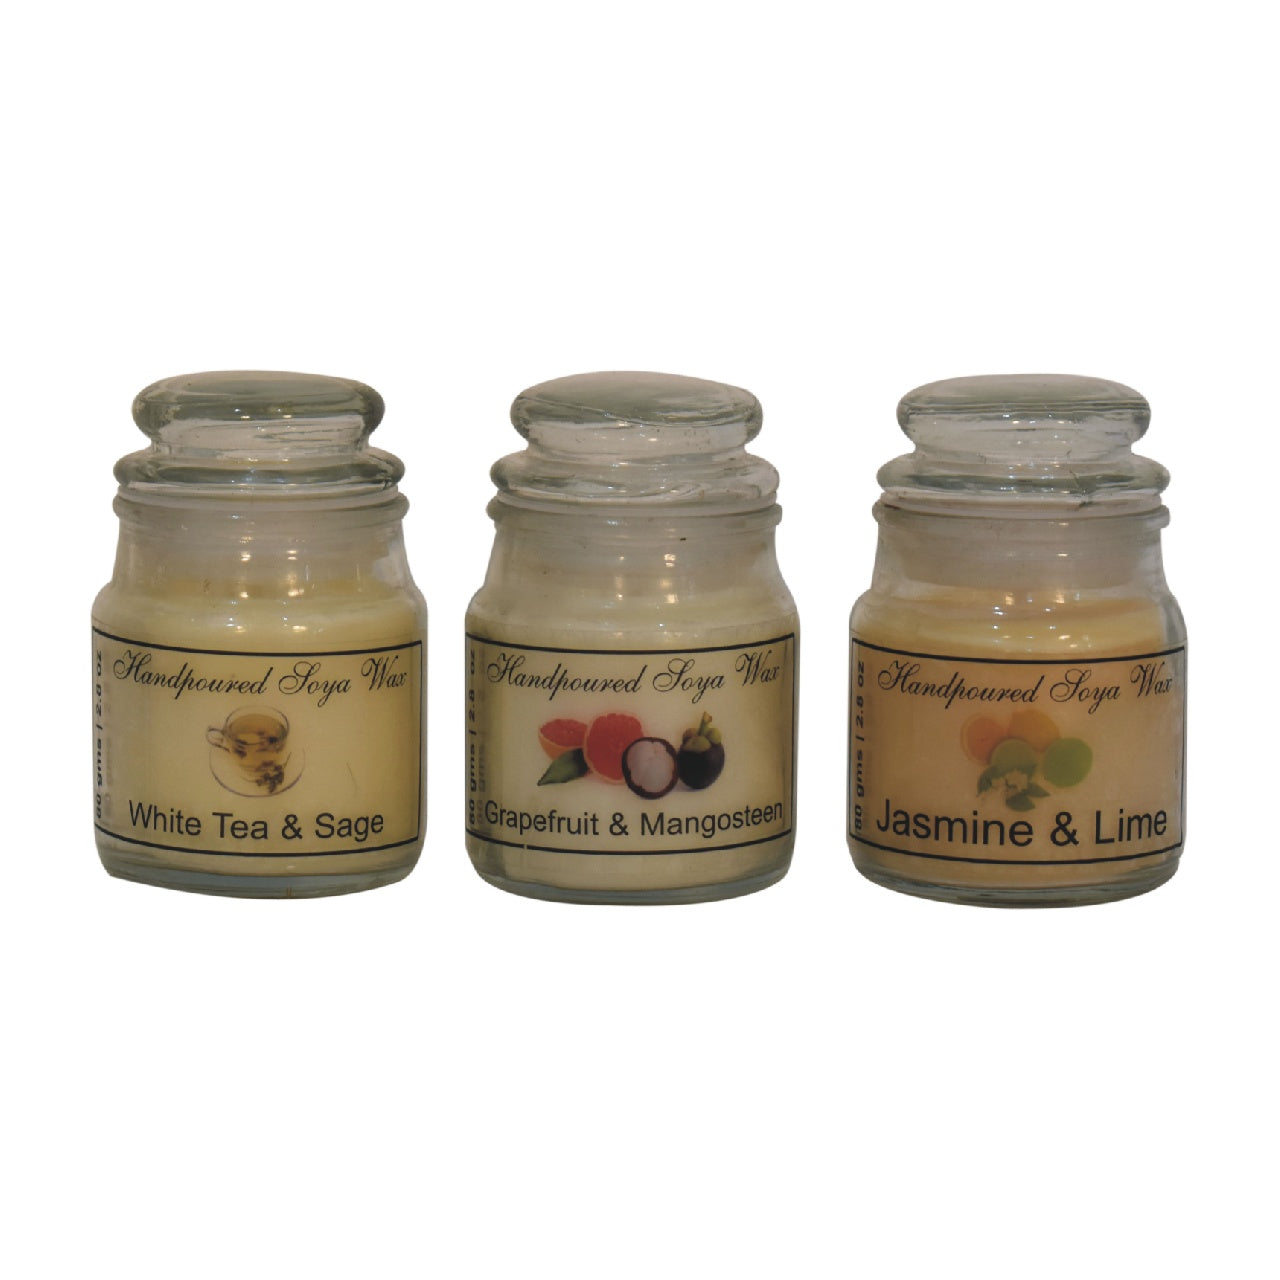 View Hourglass Candle Set of 3 White Tea Sage Grapefruit Mangosteen Jasmine Lime information